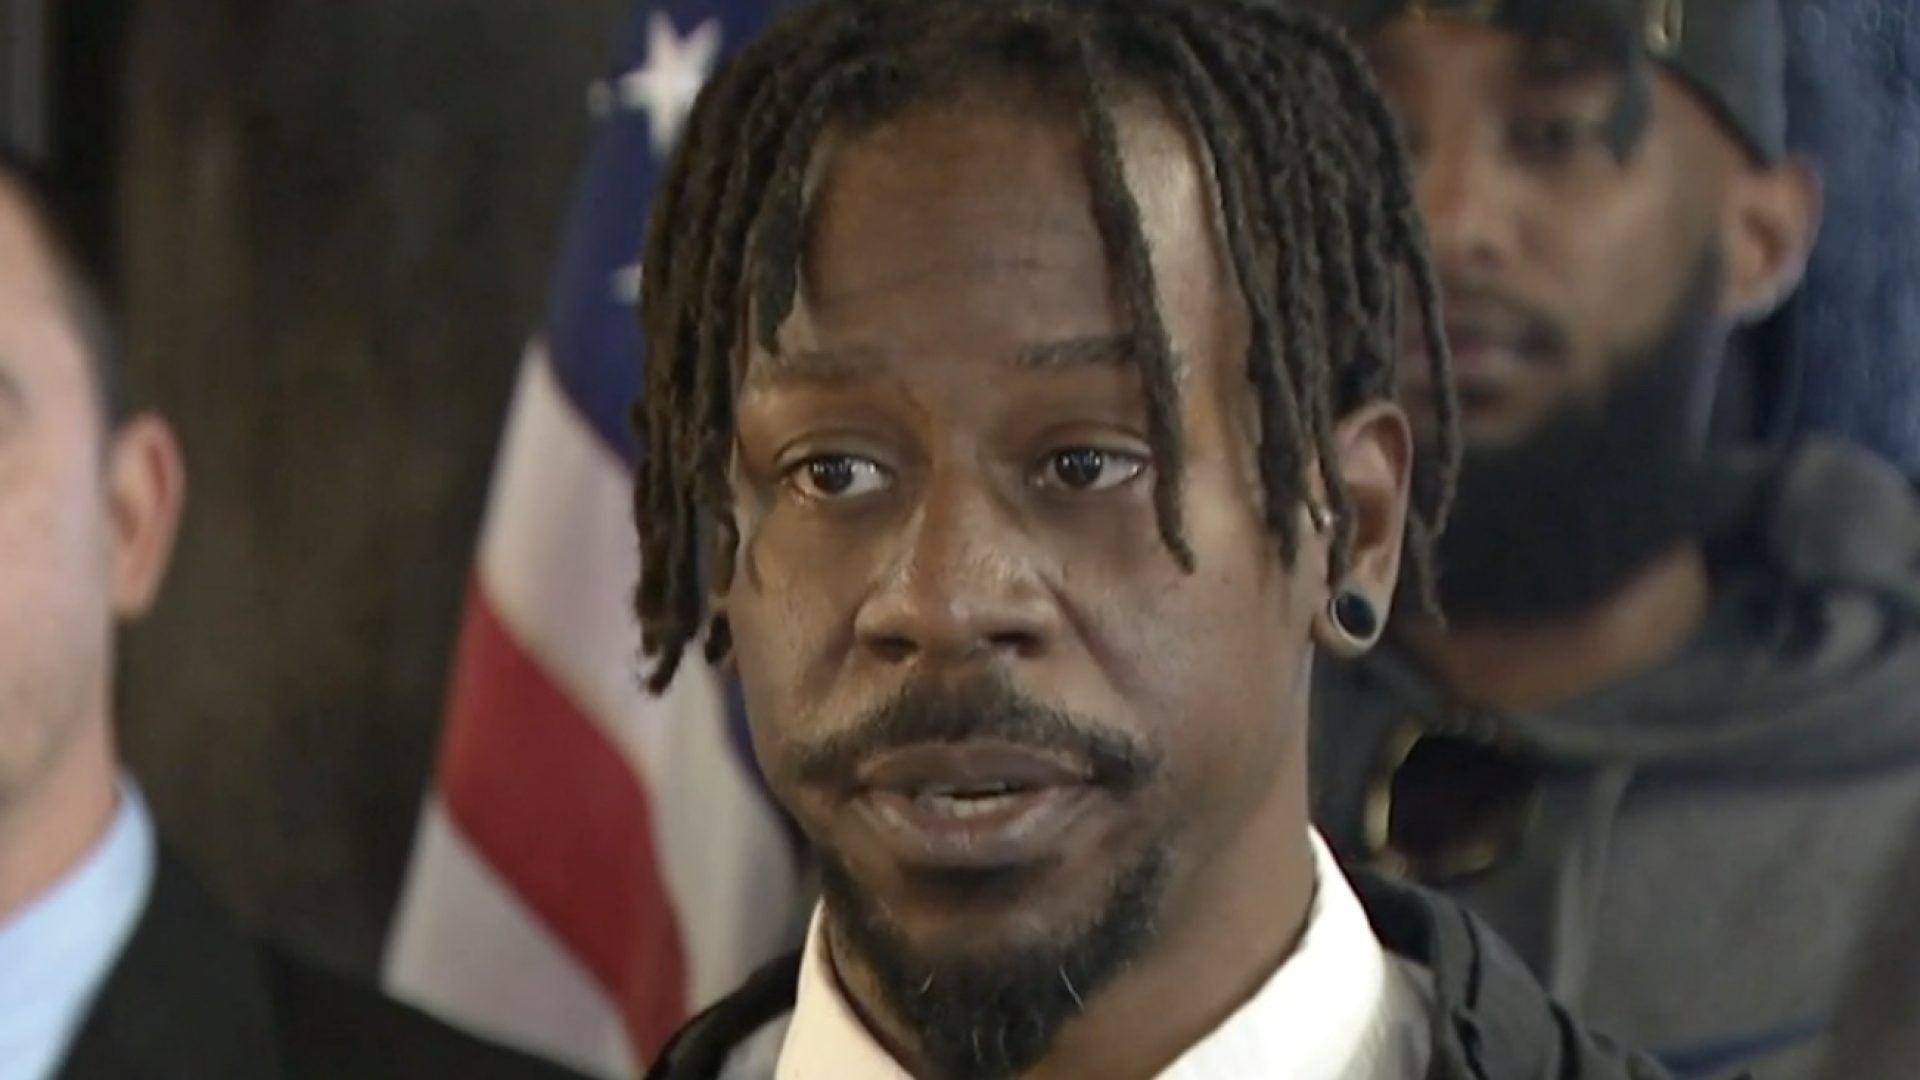 Black Job Applicant Says He Was Denied Employment Only After Refusing To Cut His Locs